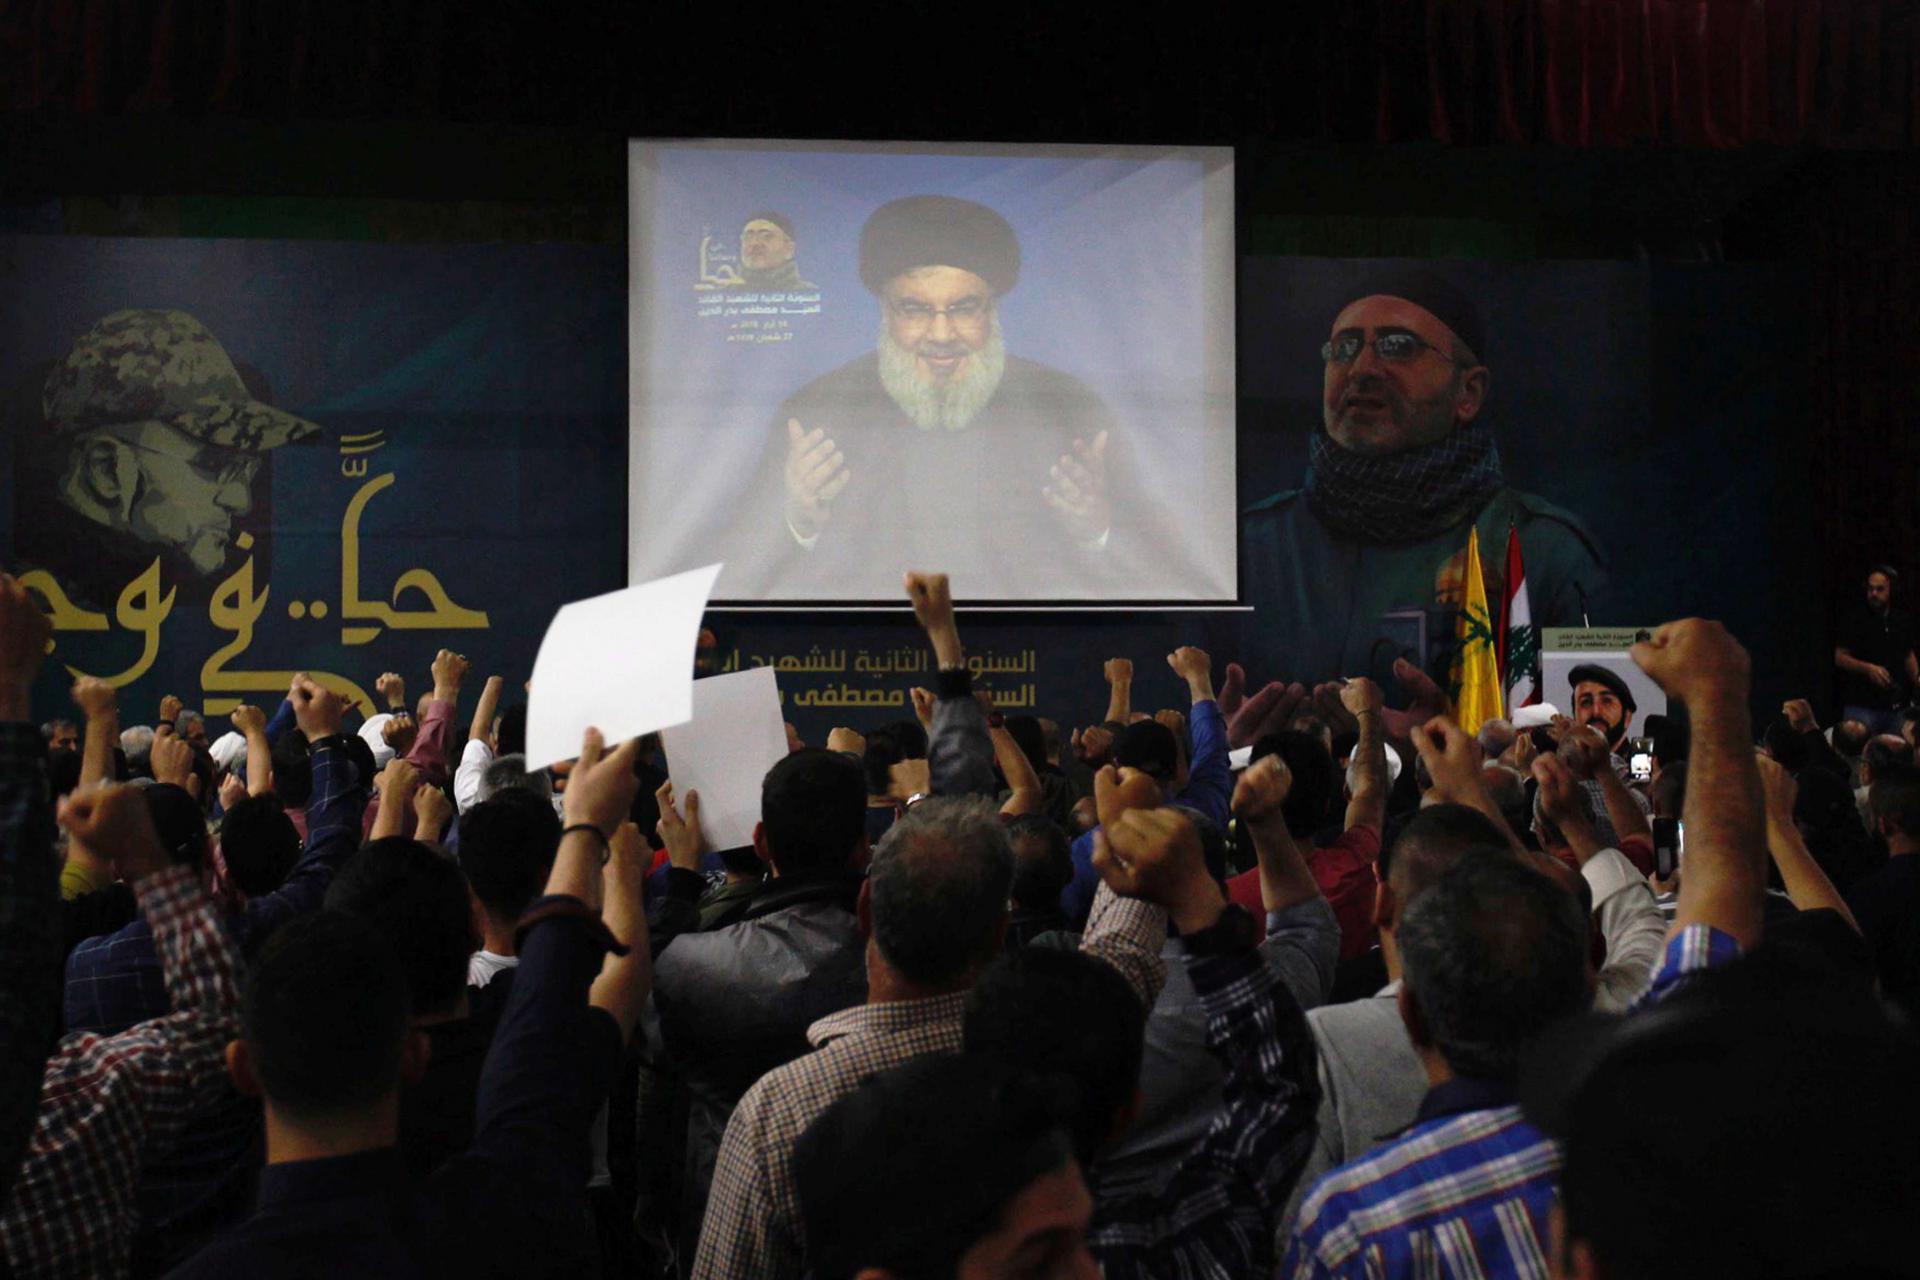 Lebanon's Hezbollah leader Sayyed Hassan Nasrallah is seen on a video screen as he addresses his supporters in Beirut, Lebanon.